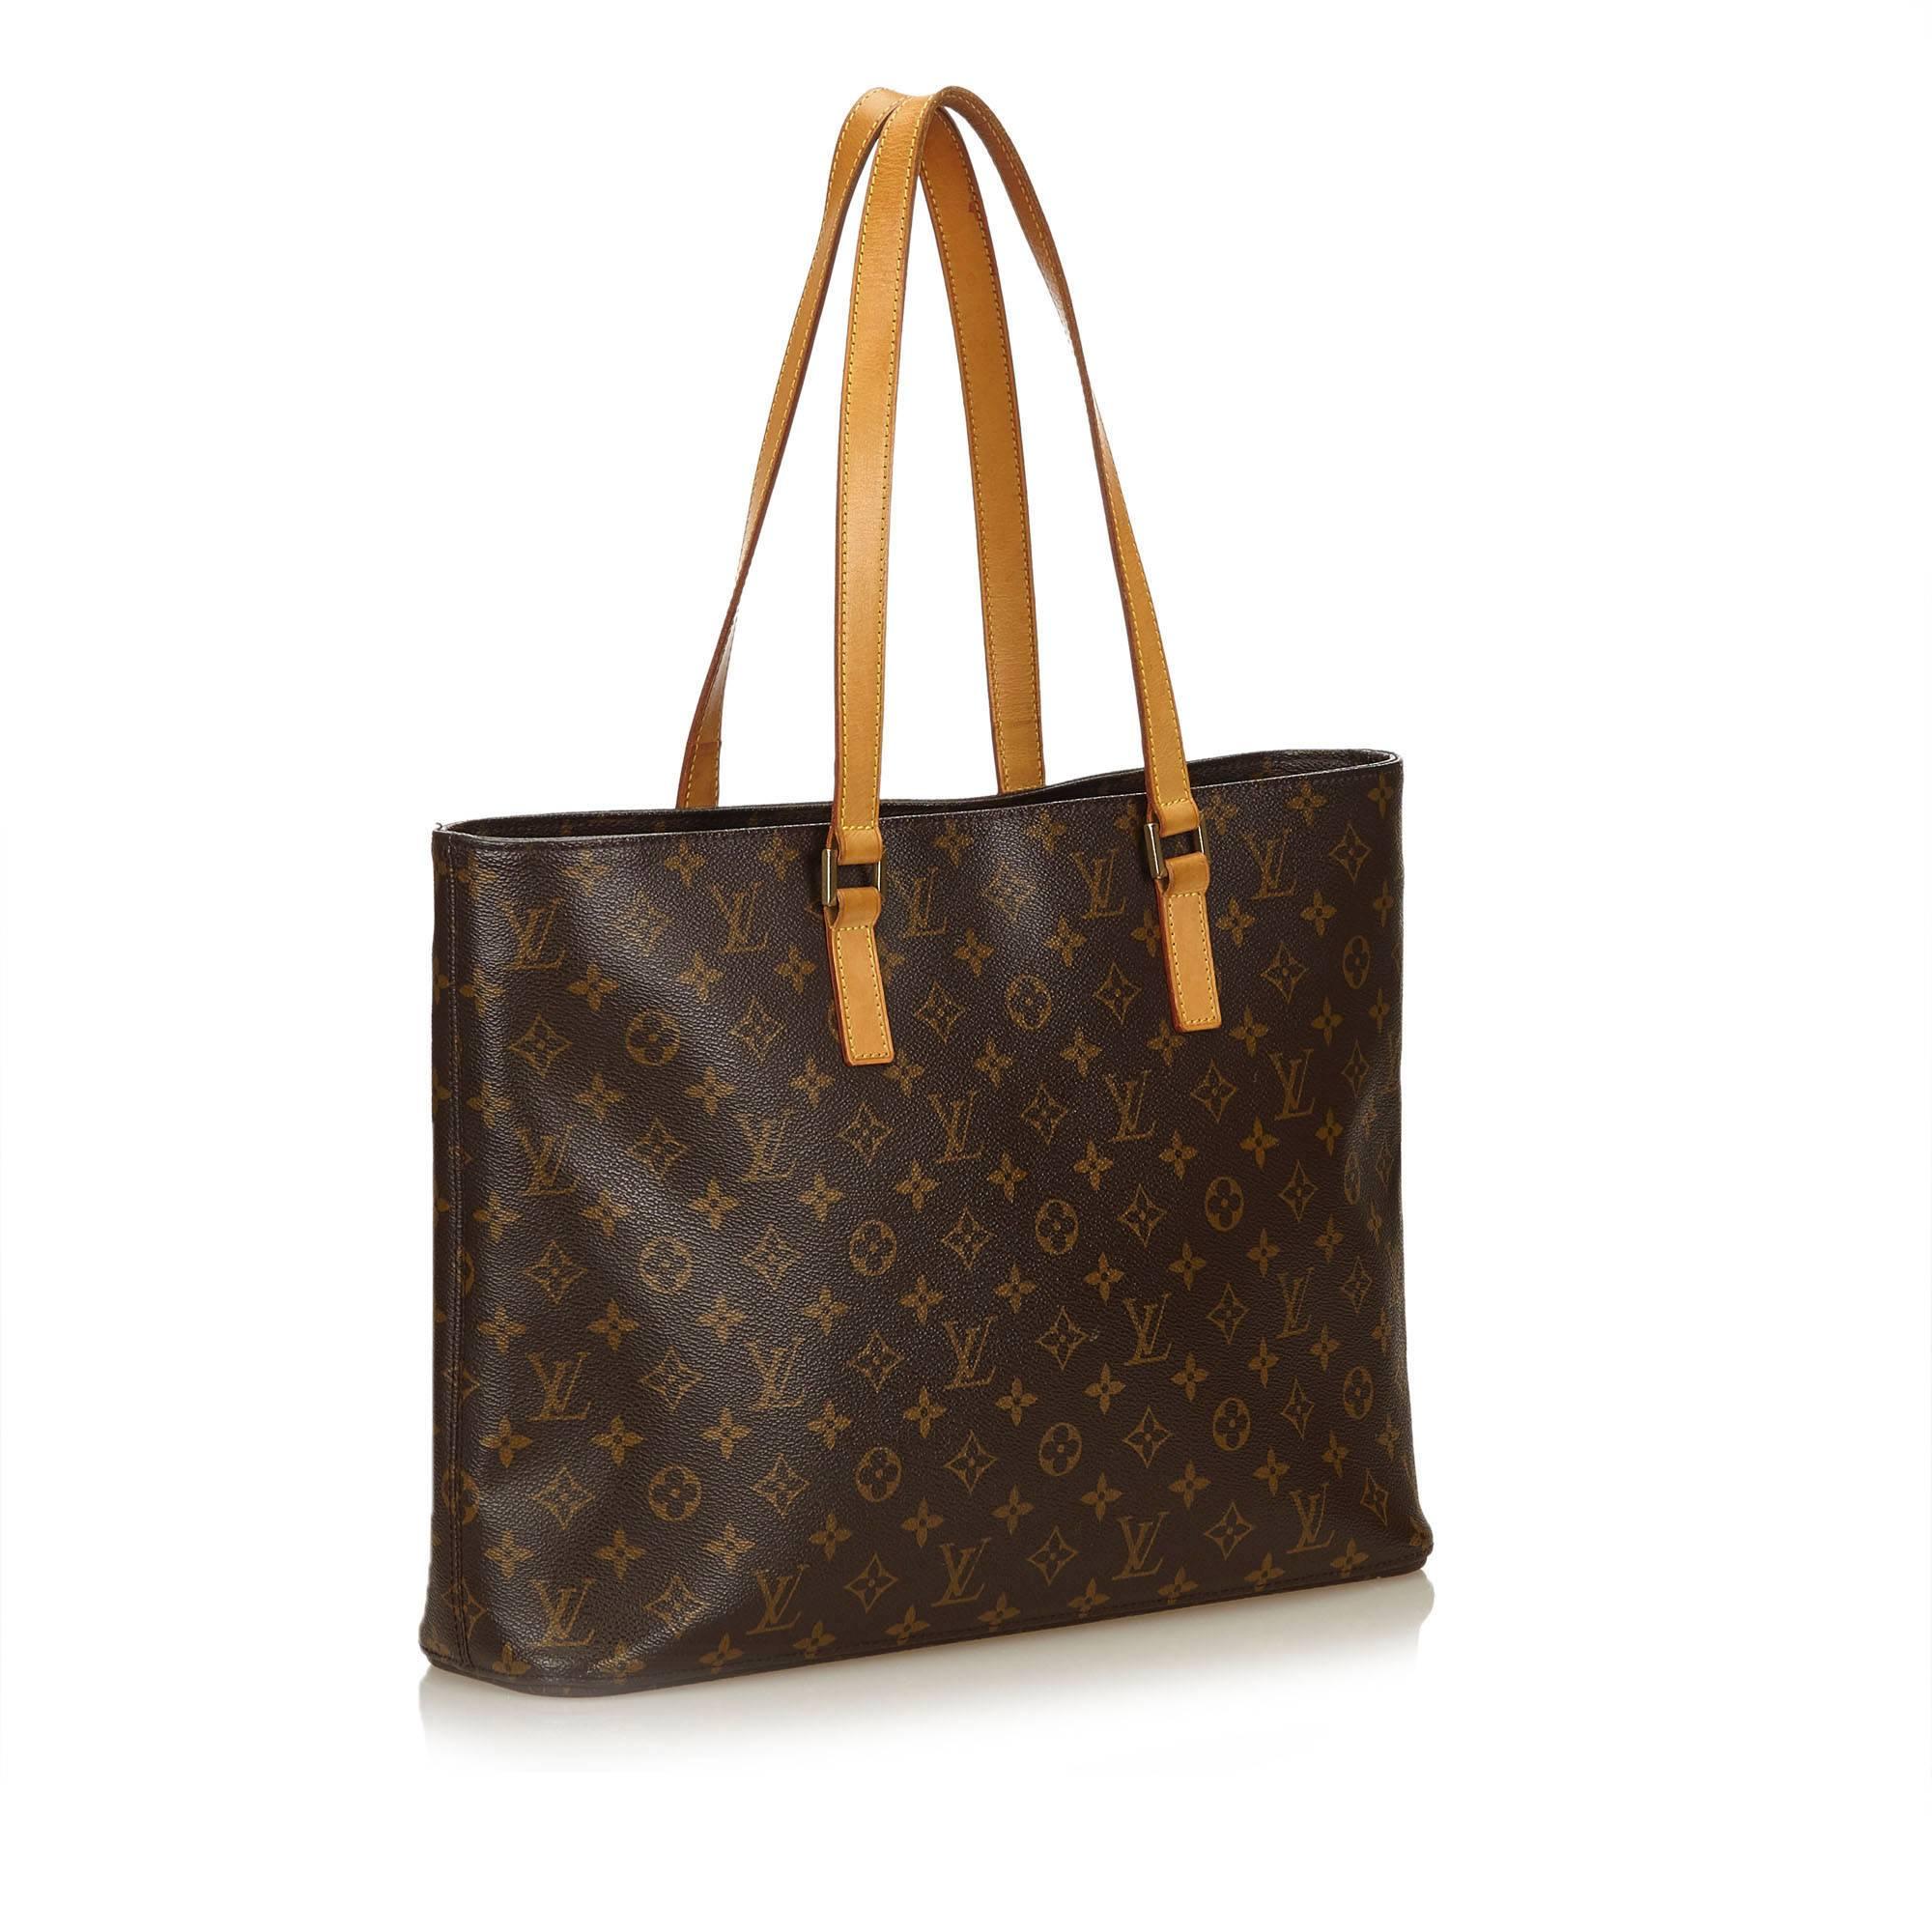 The Luco features a monogram canvas body, leather straps, a top zip closure, an interior slip pocket, and an interior open pocket. 

It carries a B+ condition rating.

Dimensions: 
Length 41 cm
Width 30 cm
Depth 11 cm

Inclusions: No longer comes